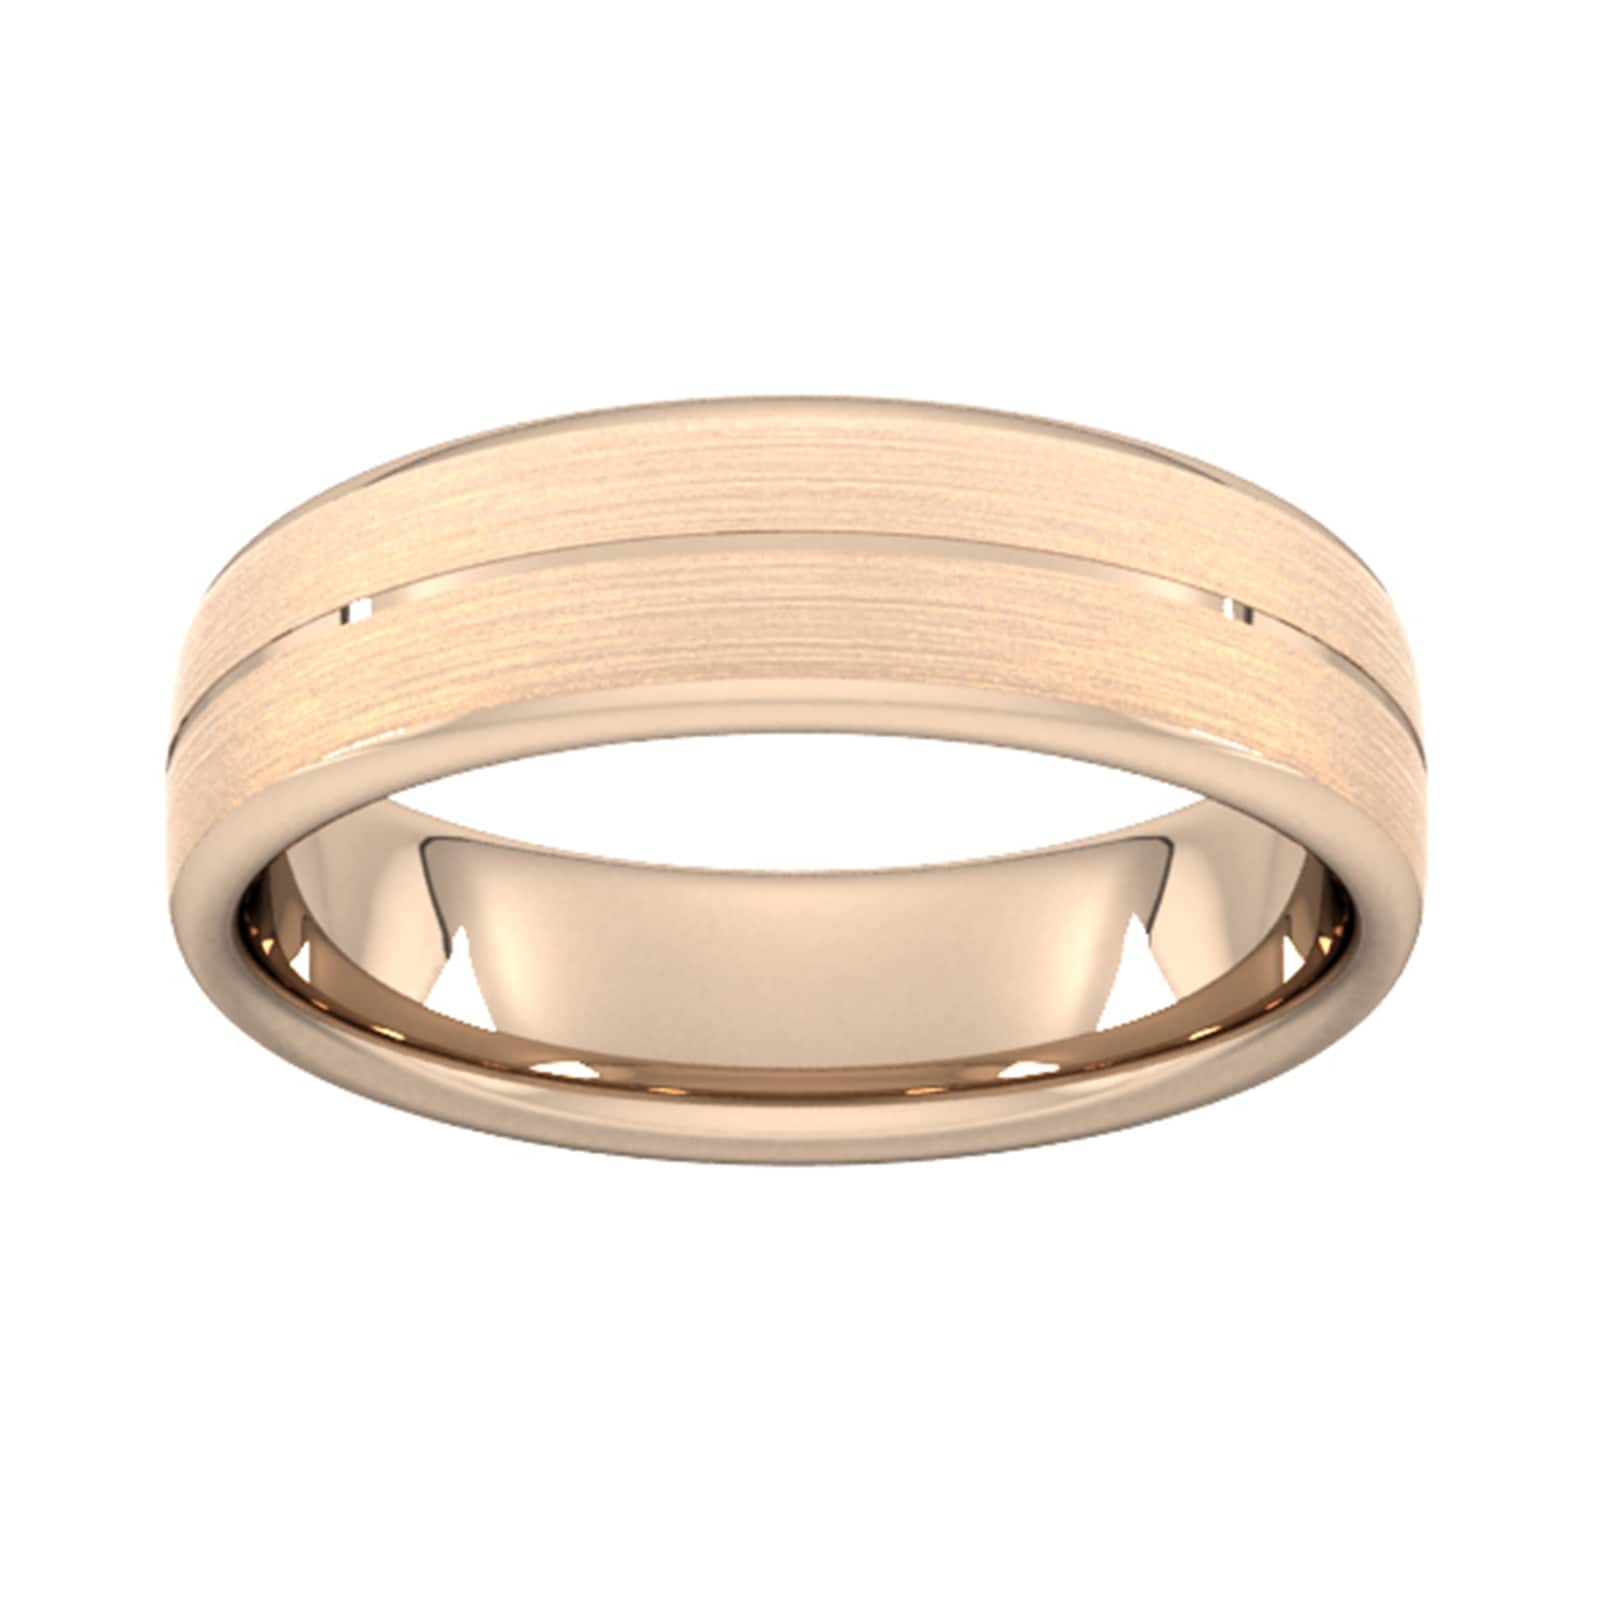 6mm Slight Court Extra Heavy Centre Groove With Chamfered Edge Wedding Ring In 18 Carat Rose Gold - Ring Size P